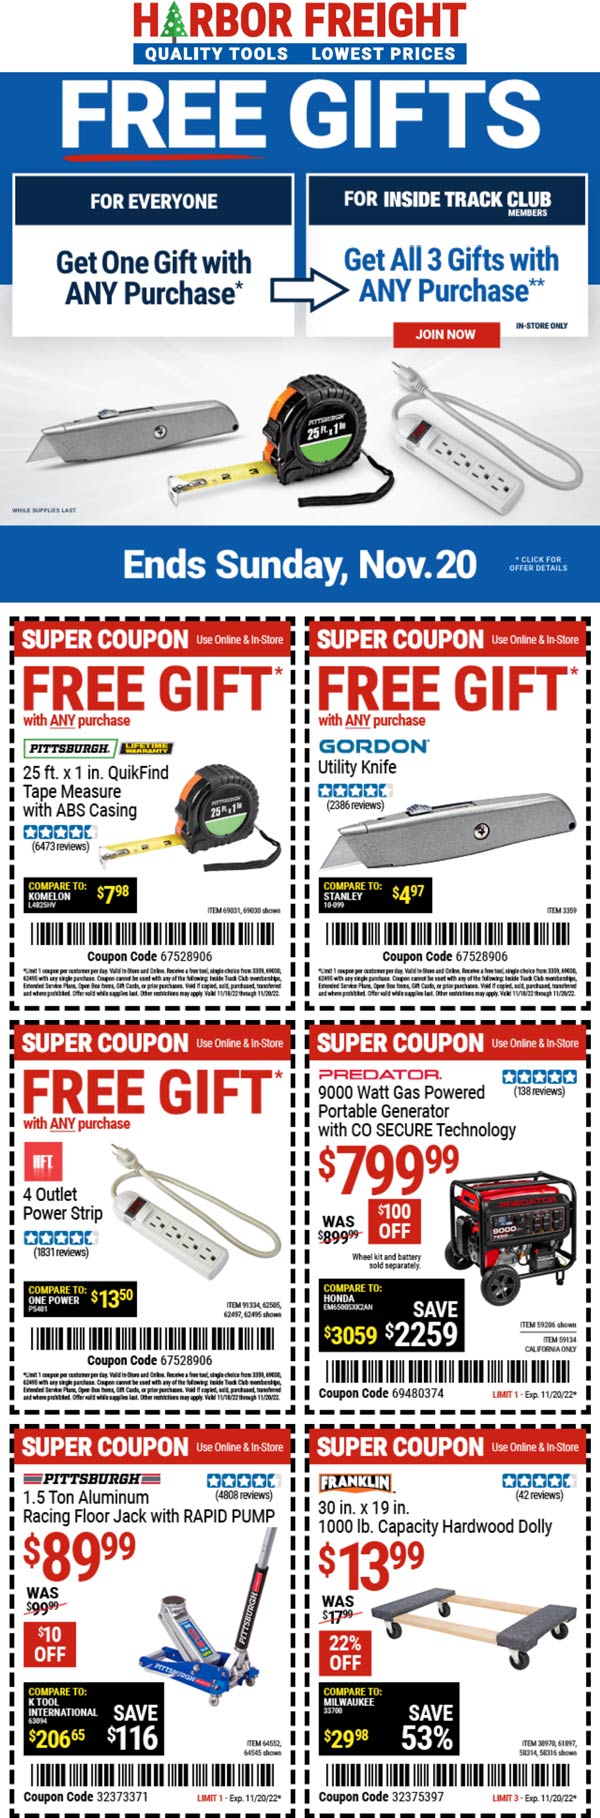 Harbor Freight restaurants Coupon  Free gifts with your order today at Harbor Freight Tools, ditto online #harborfreight 